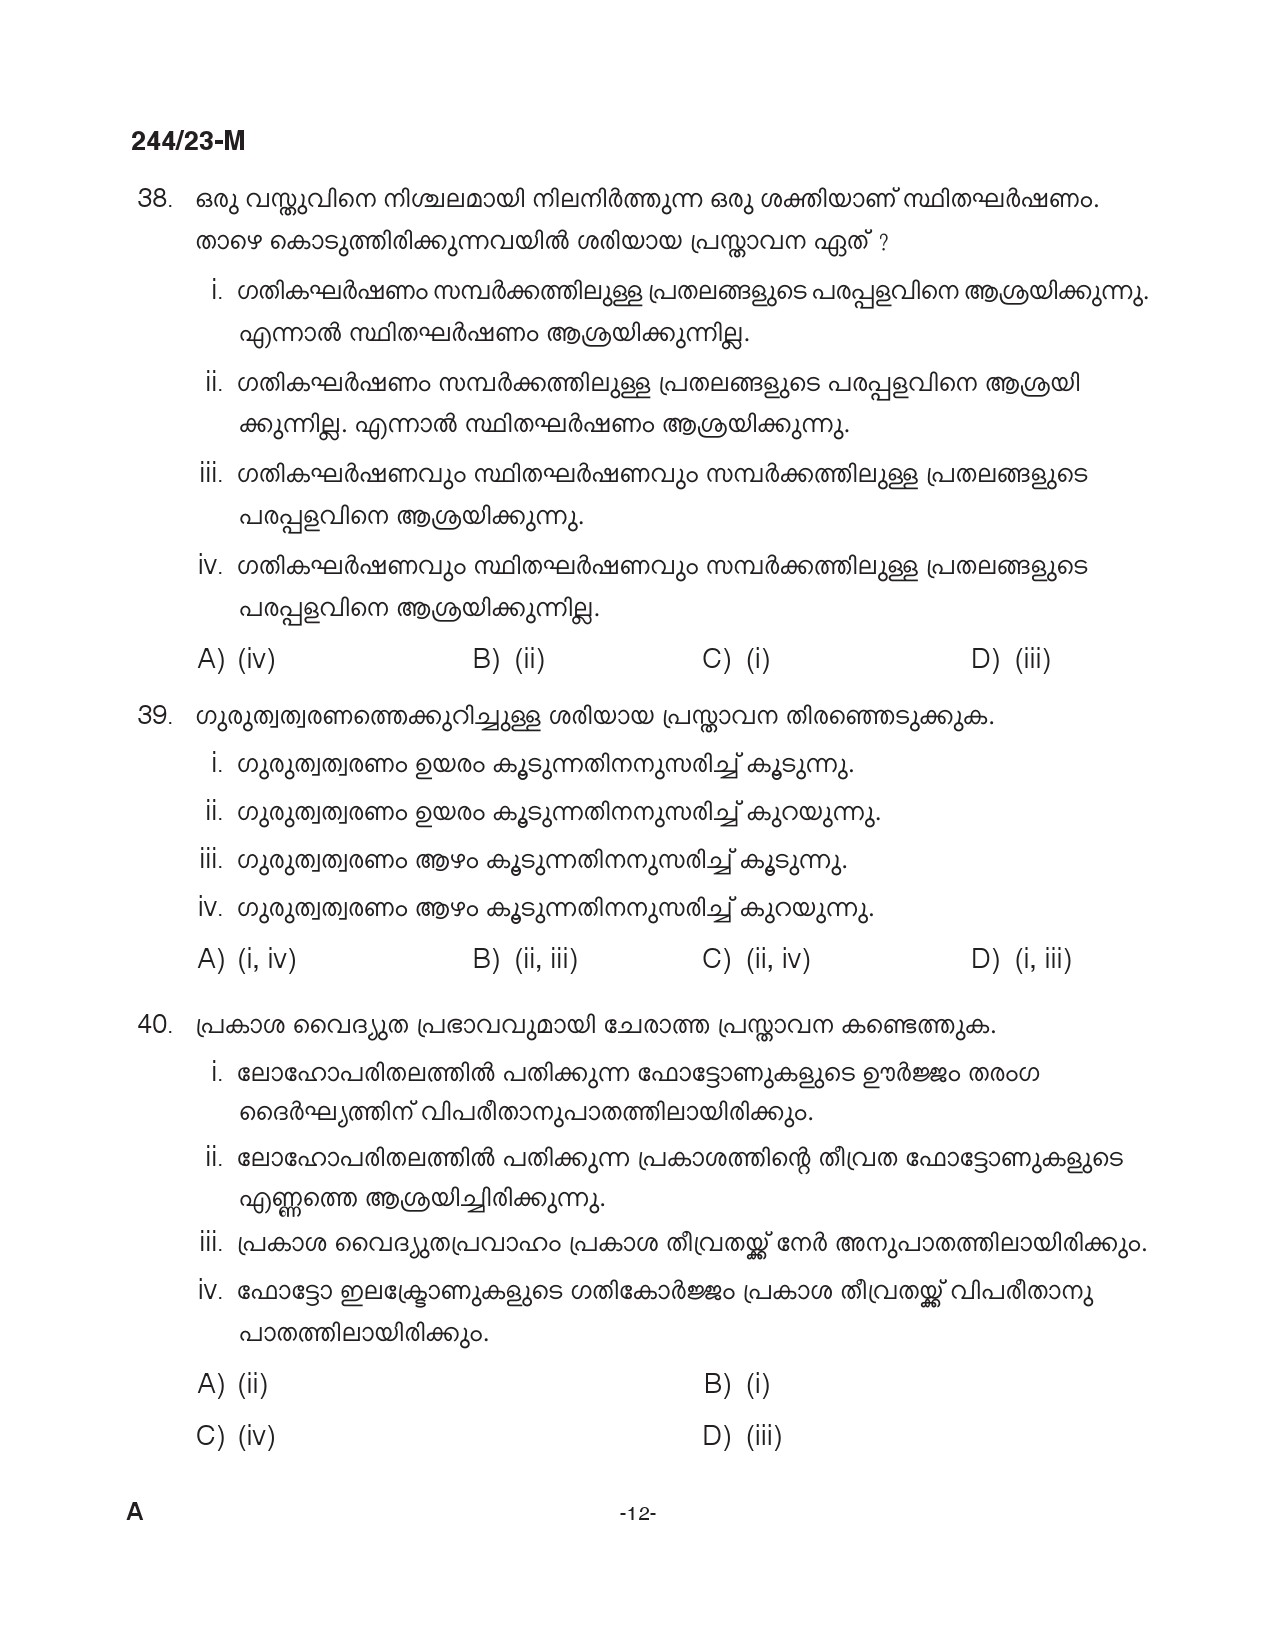 KPSC Fire and Rescue Officer Trainee Malayalam Exam 2023 Code 2442023 M 11